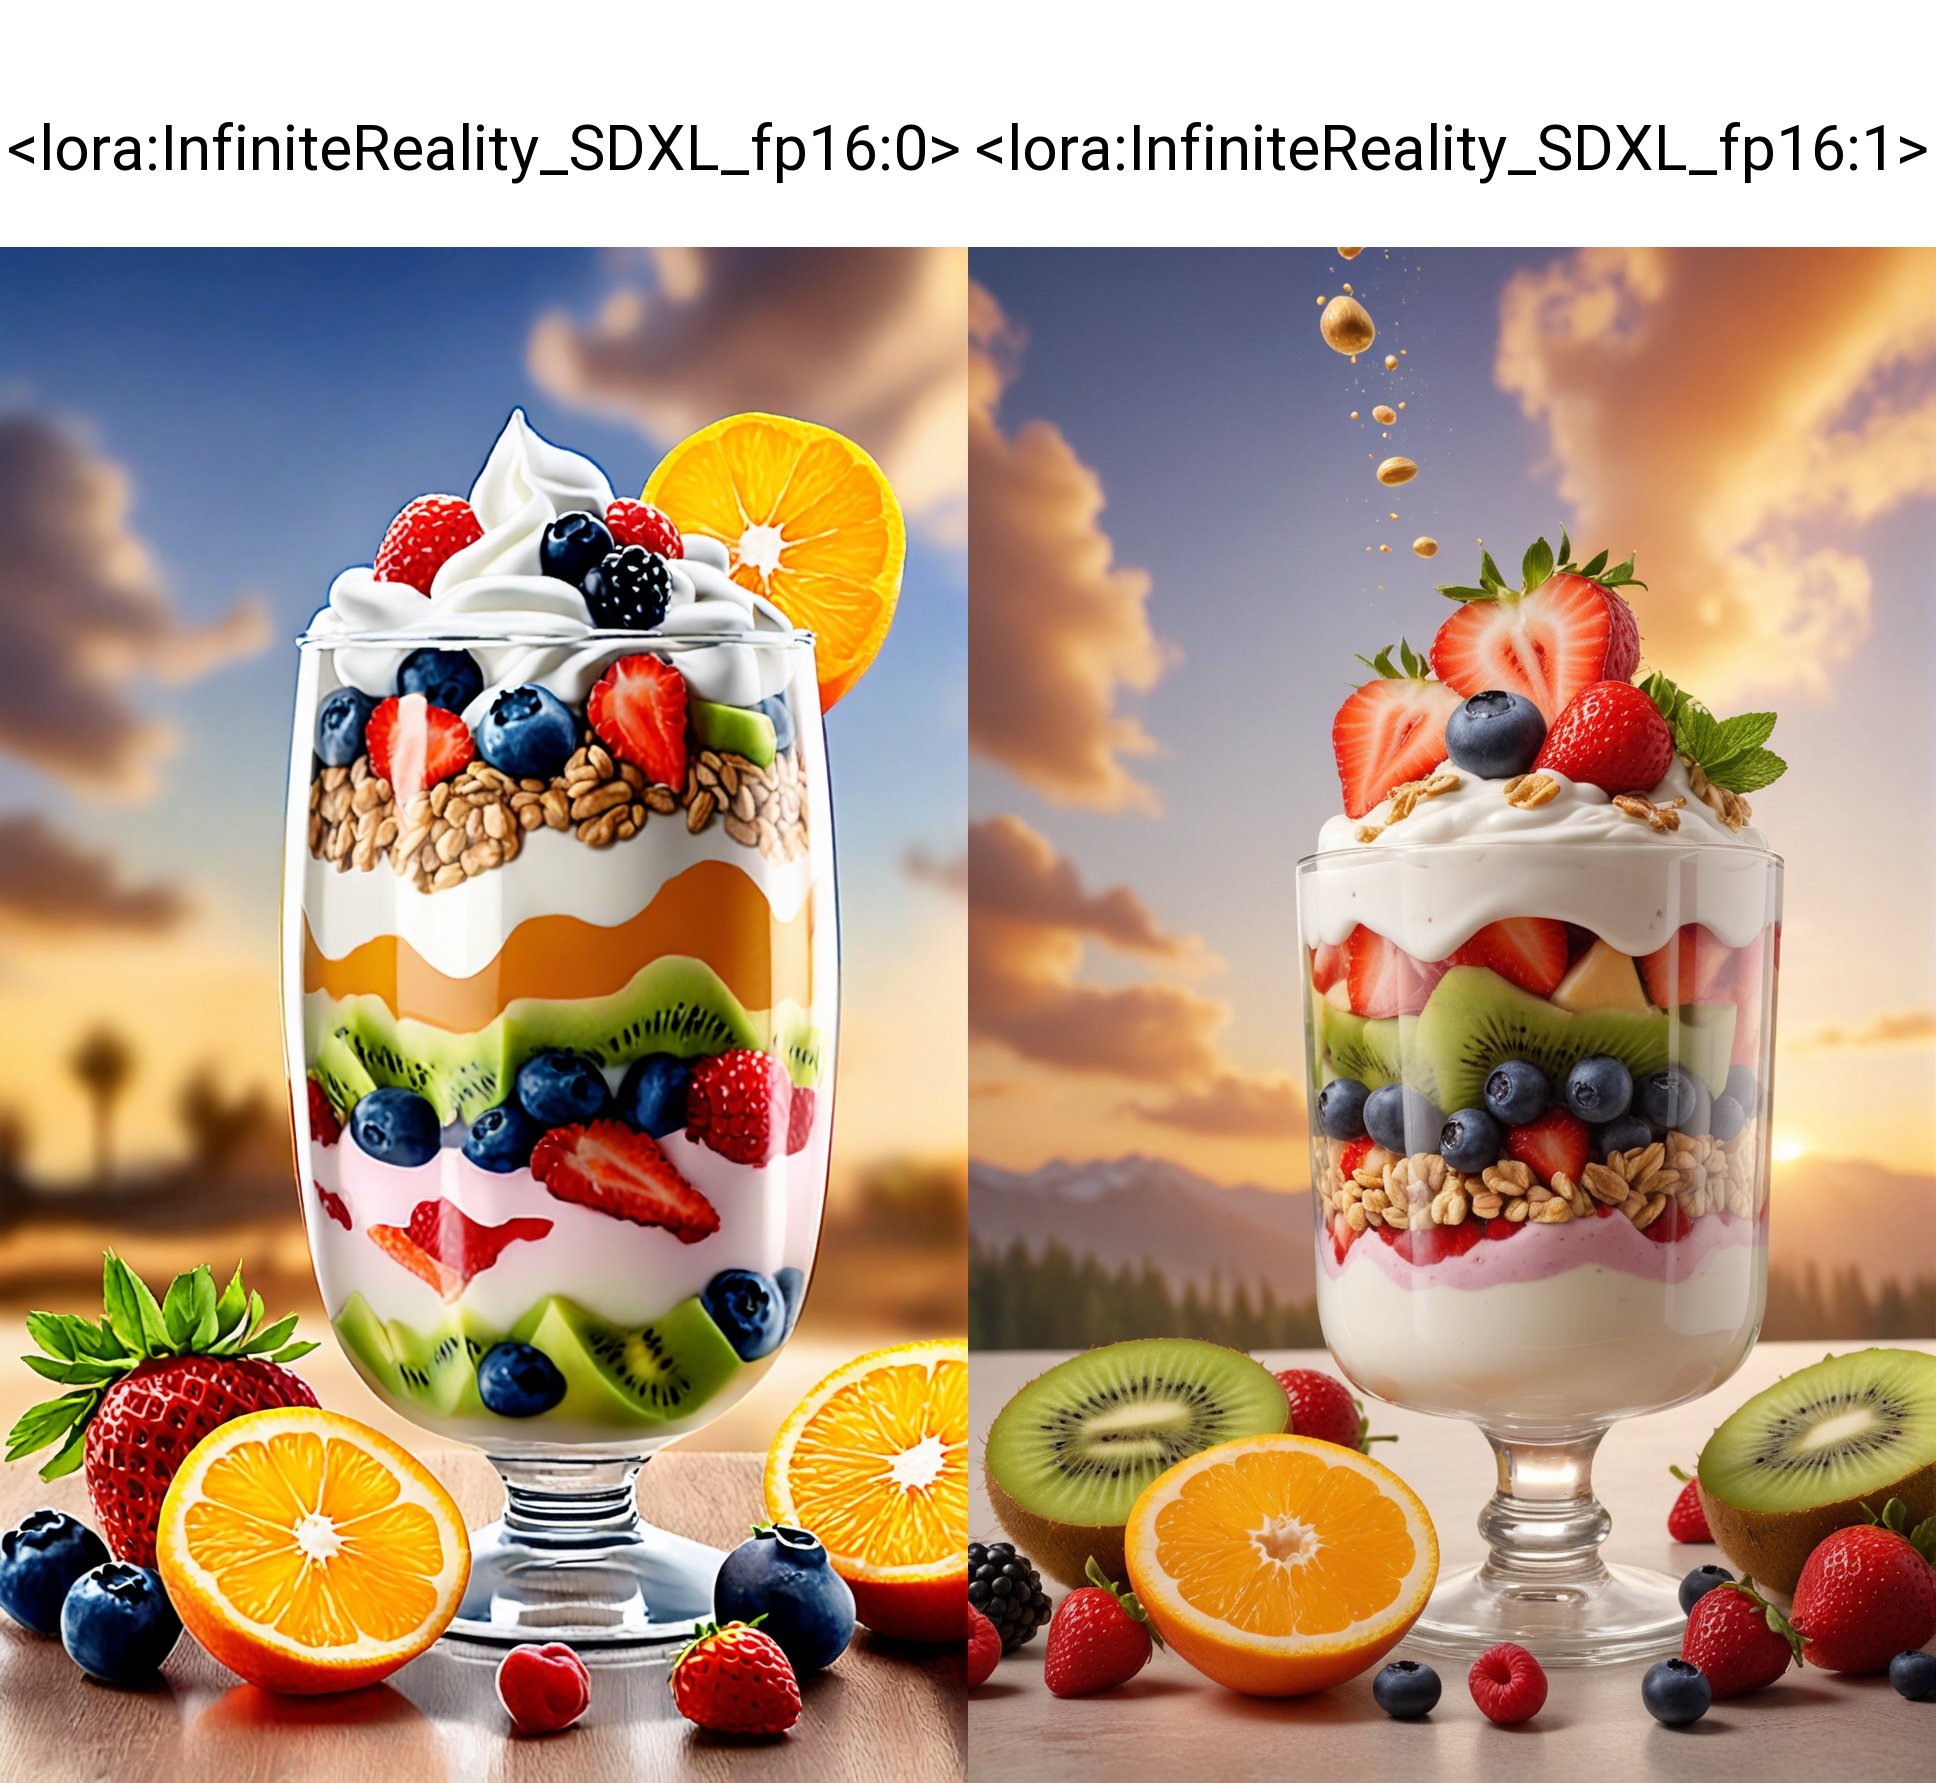 breathtaking 8k, extremely detailed ,,masterpiece,Fresh fruit parfait scene with elements floating in the air, against a sunrise orange background, high resolution, high detail, hyper realistic style, showcasing layers of yogurt. granola, honey drizzle, and a variety of fresh fruits like strawberries, blueberries, and kiwi slices.  <lora:InfiniteReality_SDXL_fp16:0> . award-winning, professional, highly detailed